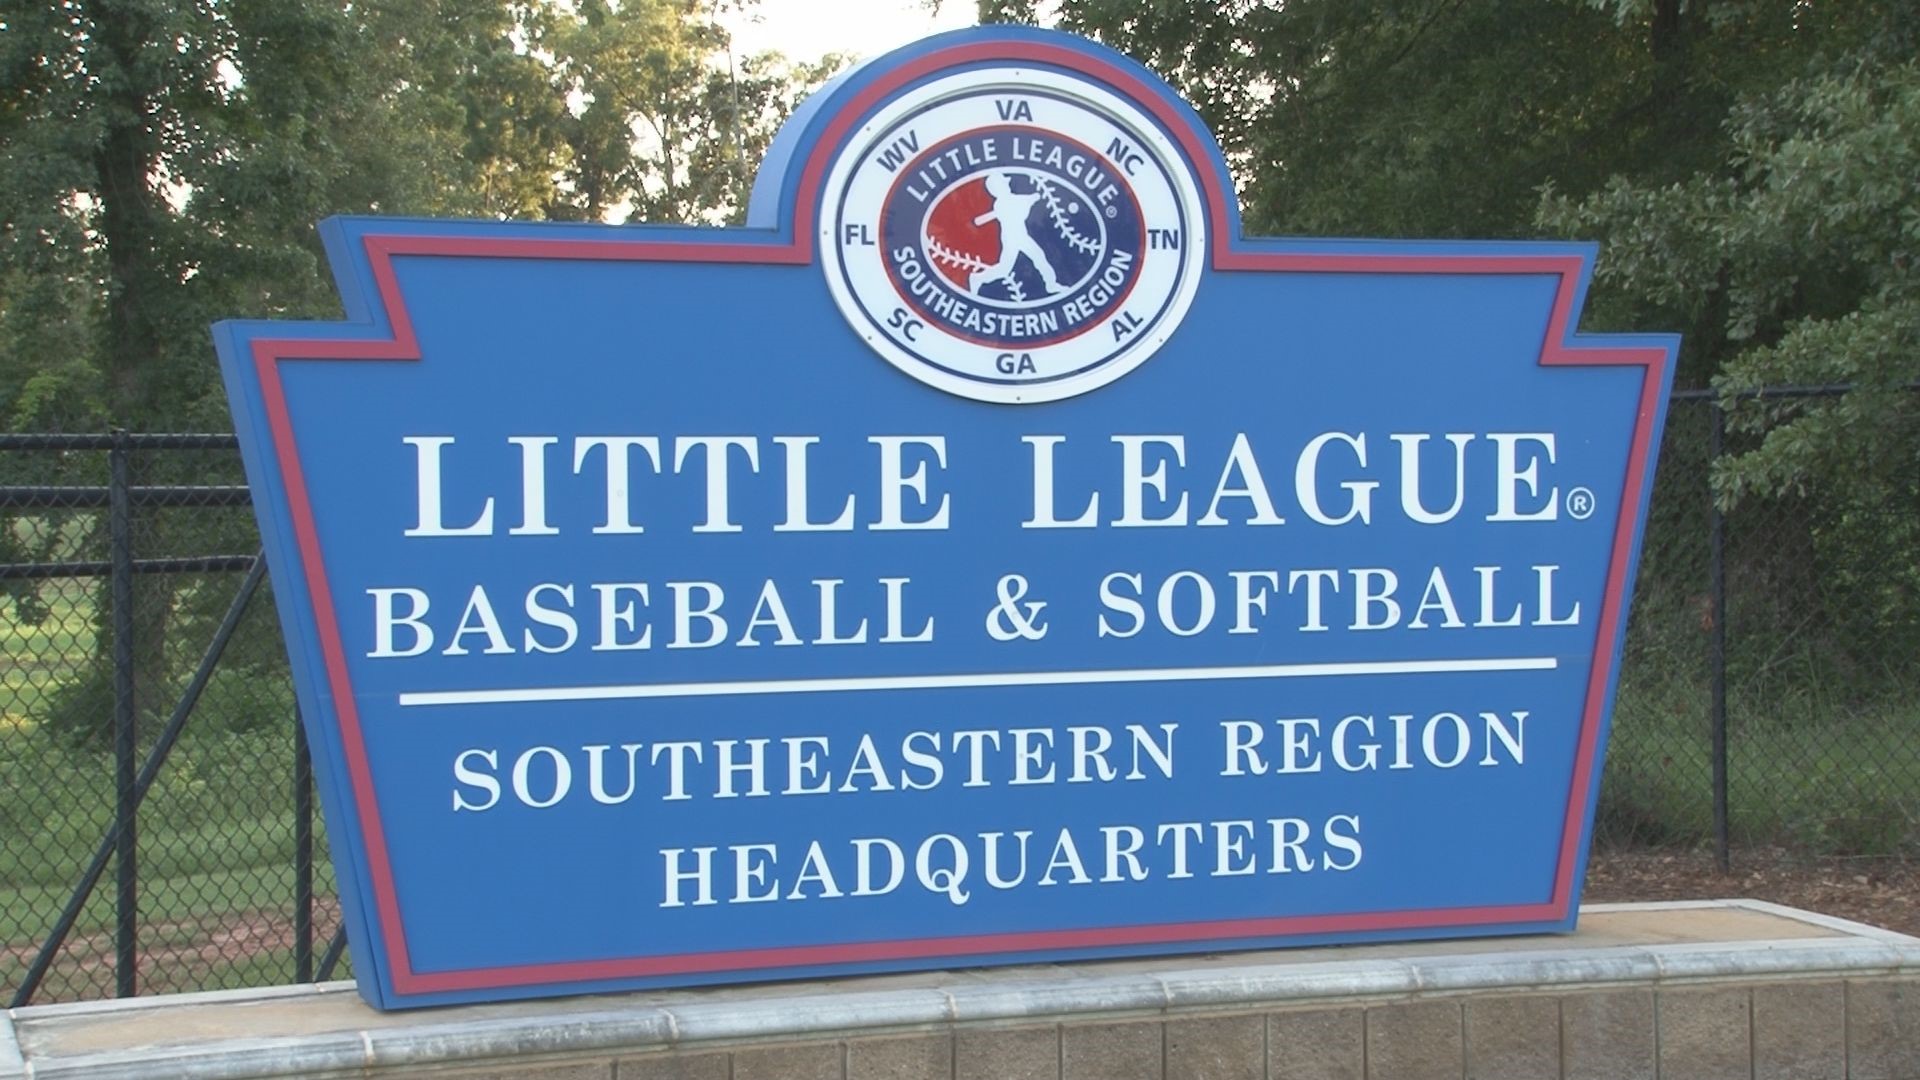 The Little League World Series Southeast Region came to Houston County 10 years ago and its impact has been felt ever since.